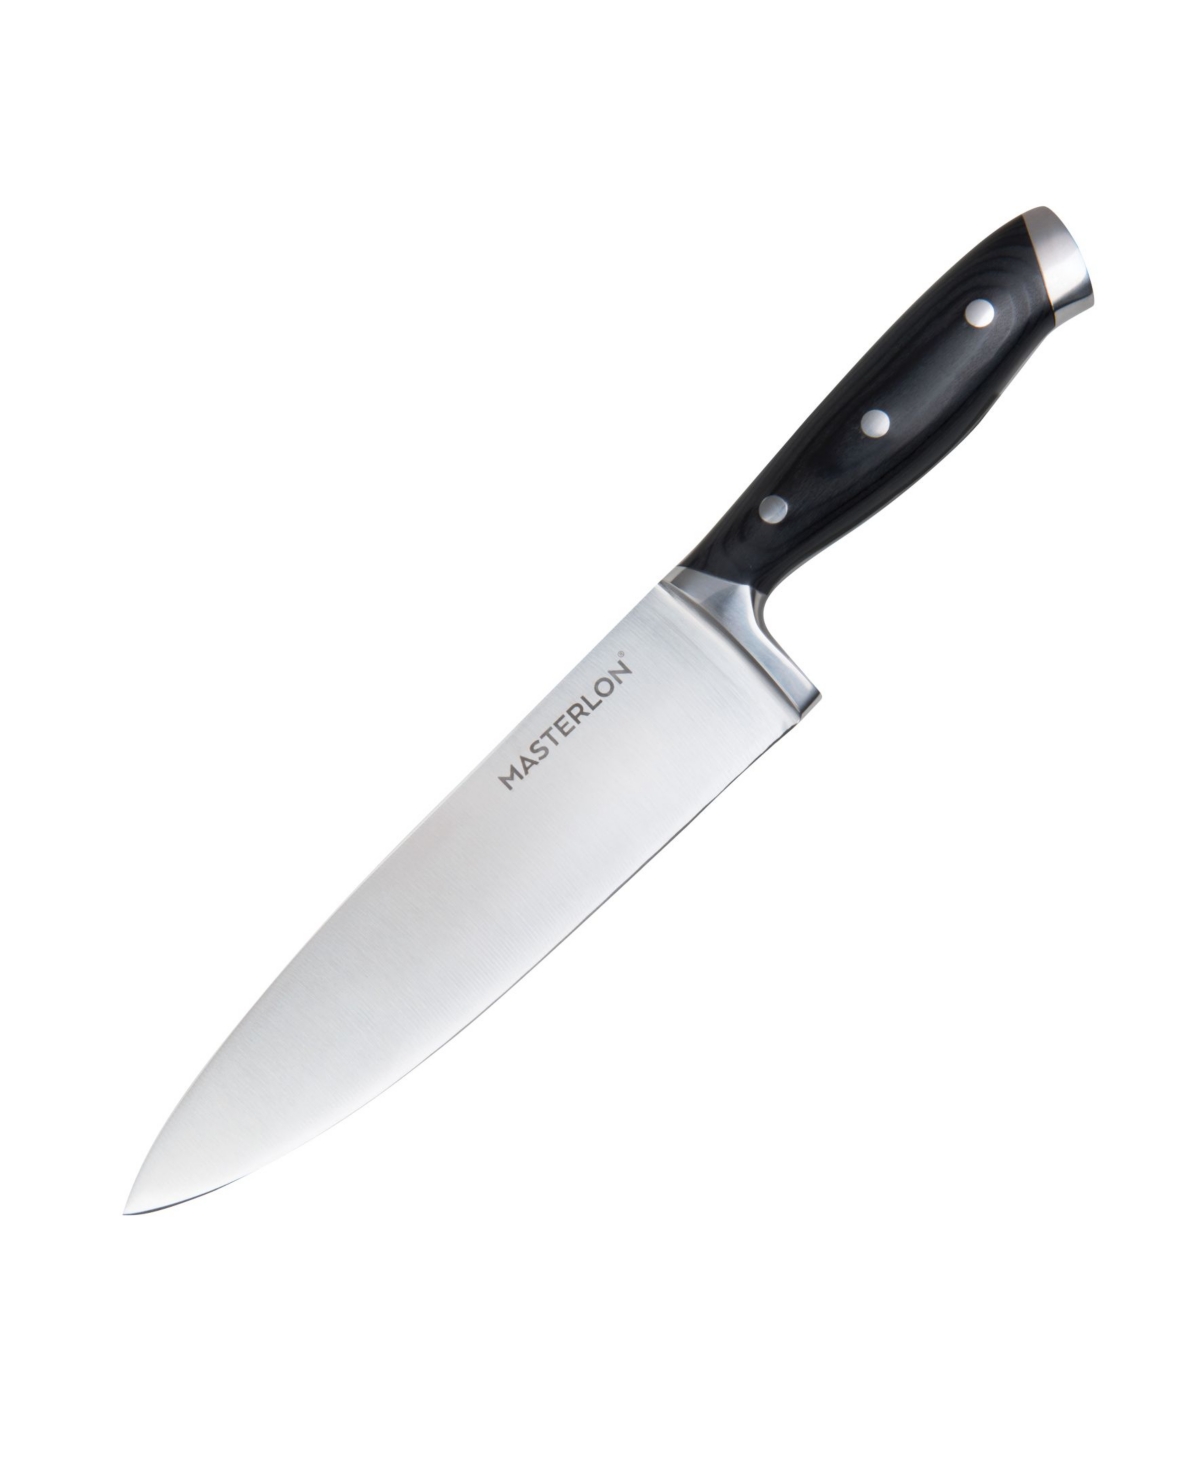 Masterpan Masterlon Triple Rivet Collection Chef's Knife Stainless Steel Blade, 8"